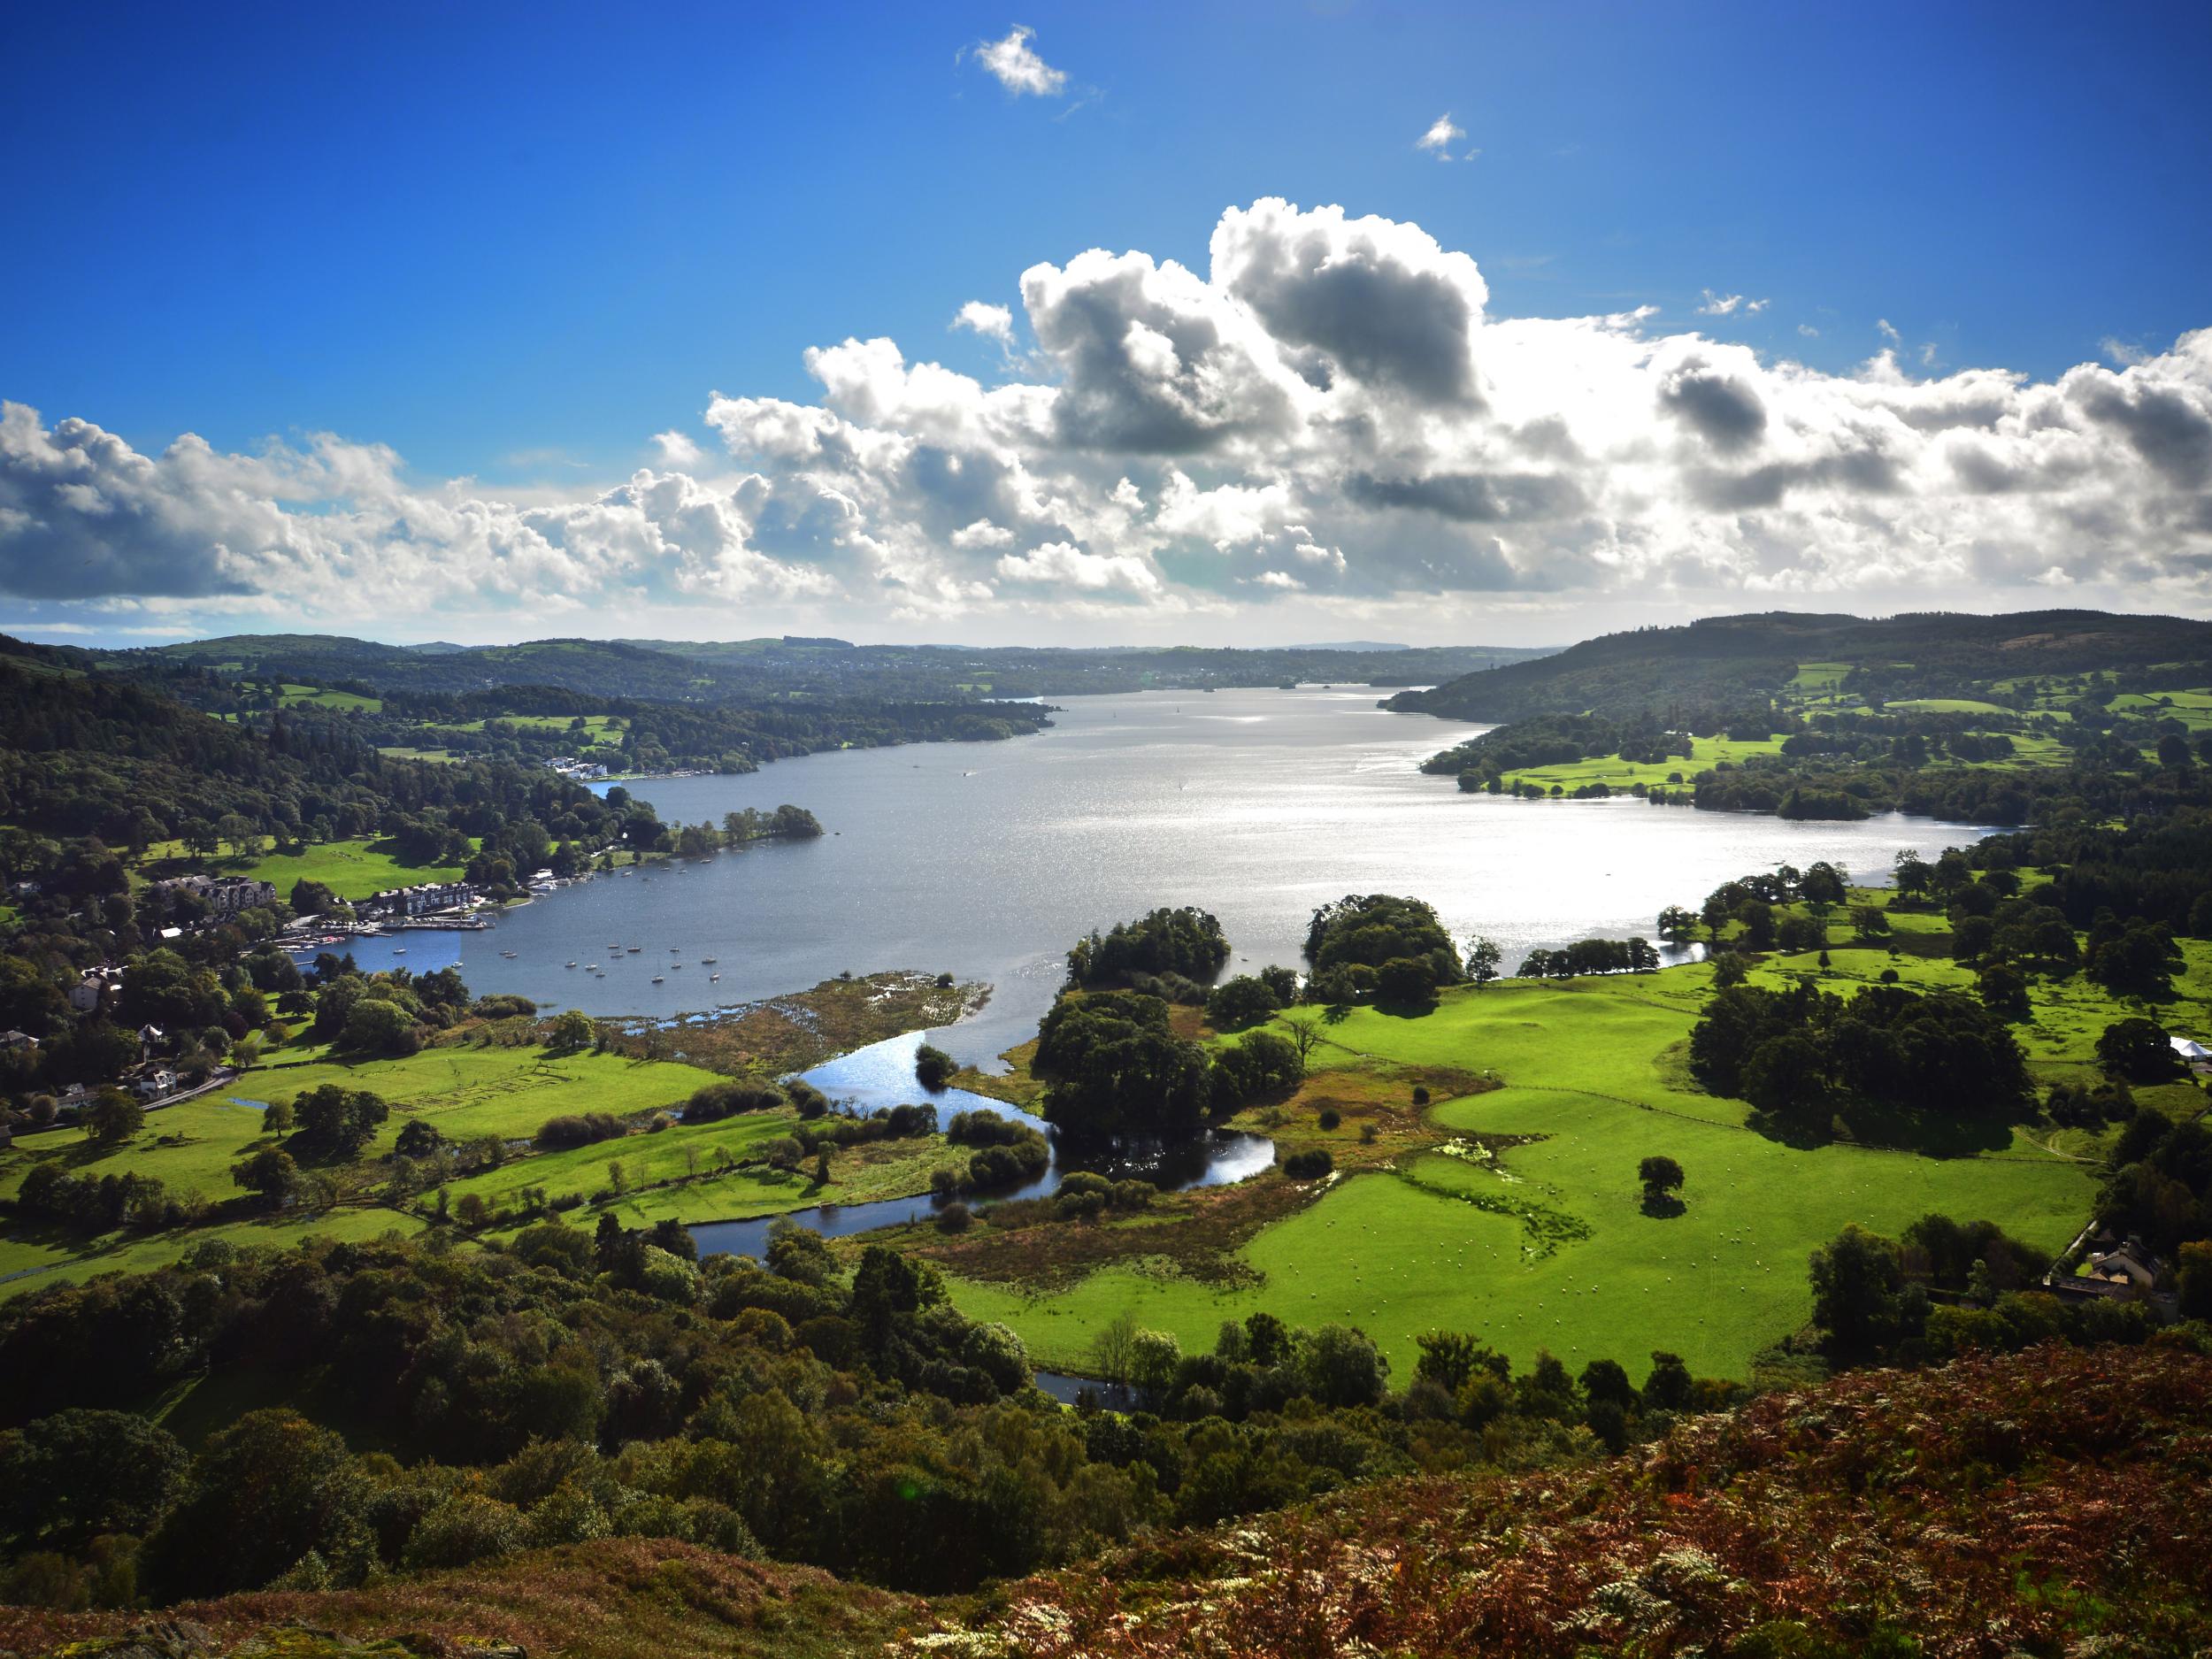 The spectacular Windermere lake is more than 10 miles long